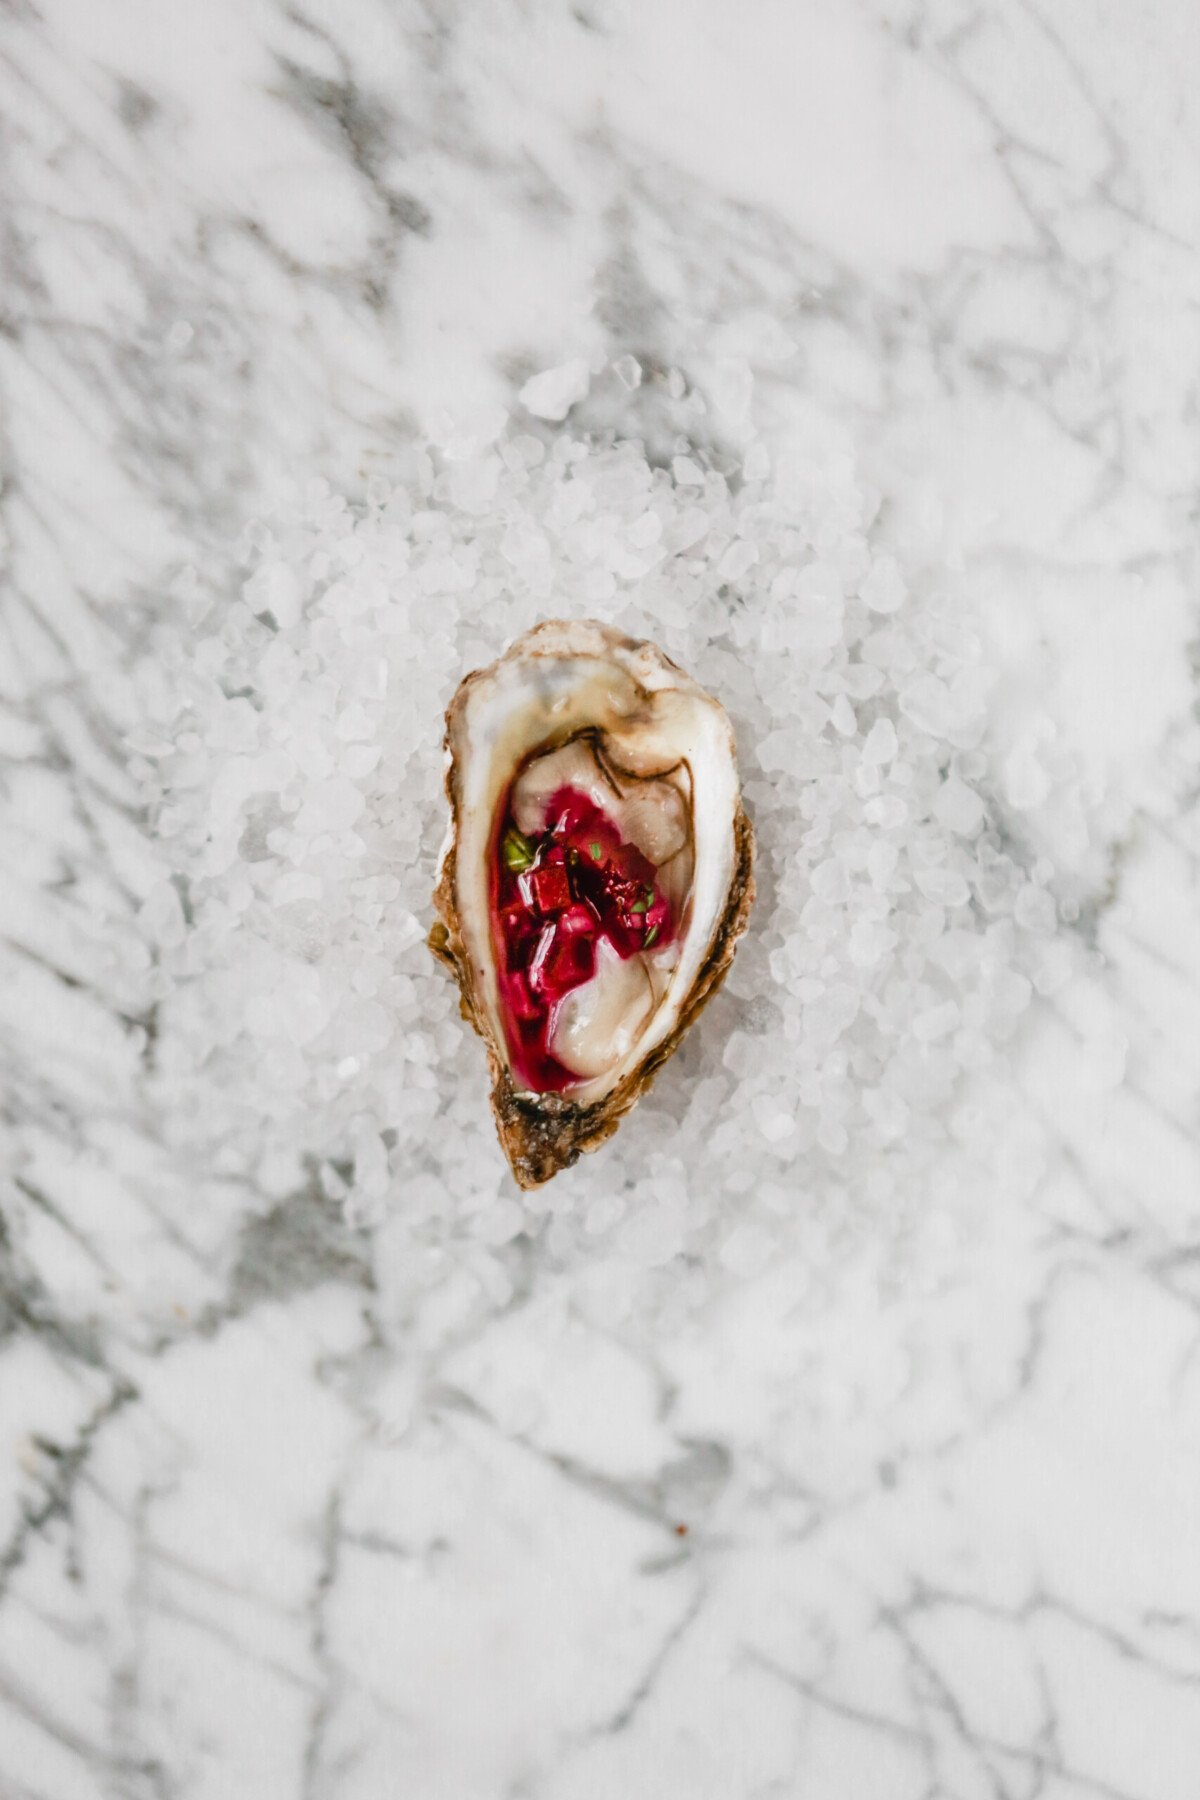 Photograph of one oyster on the half shell set on a bed of rock salt topped with a red mignonette